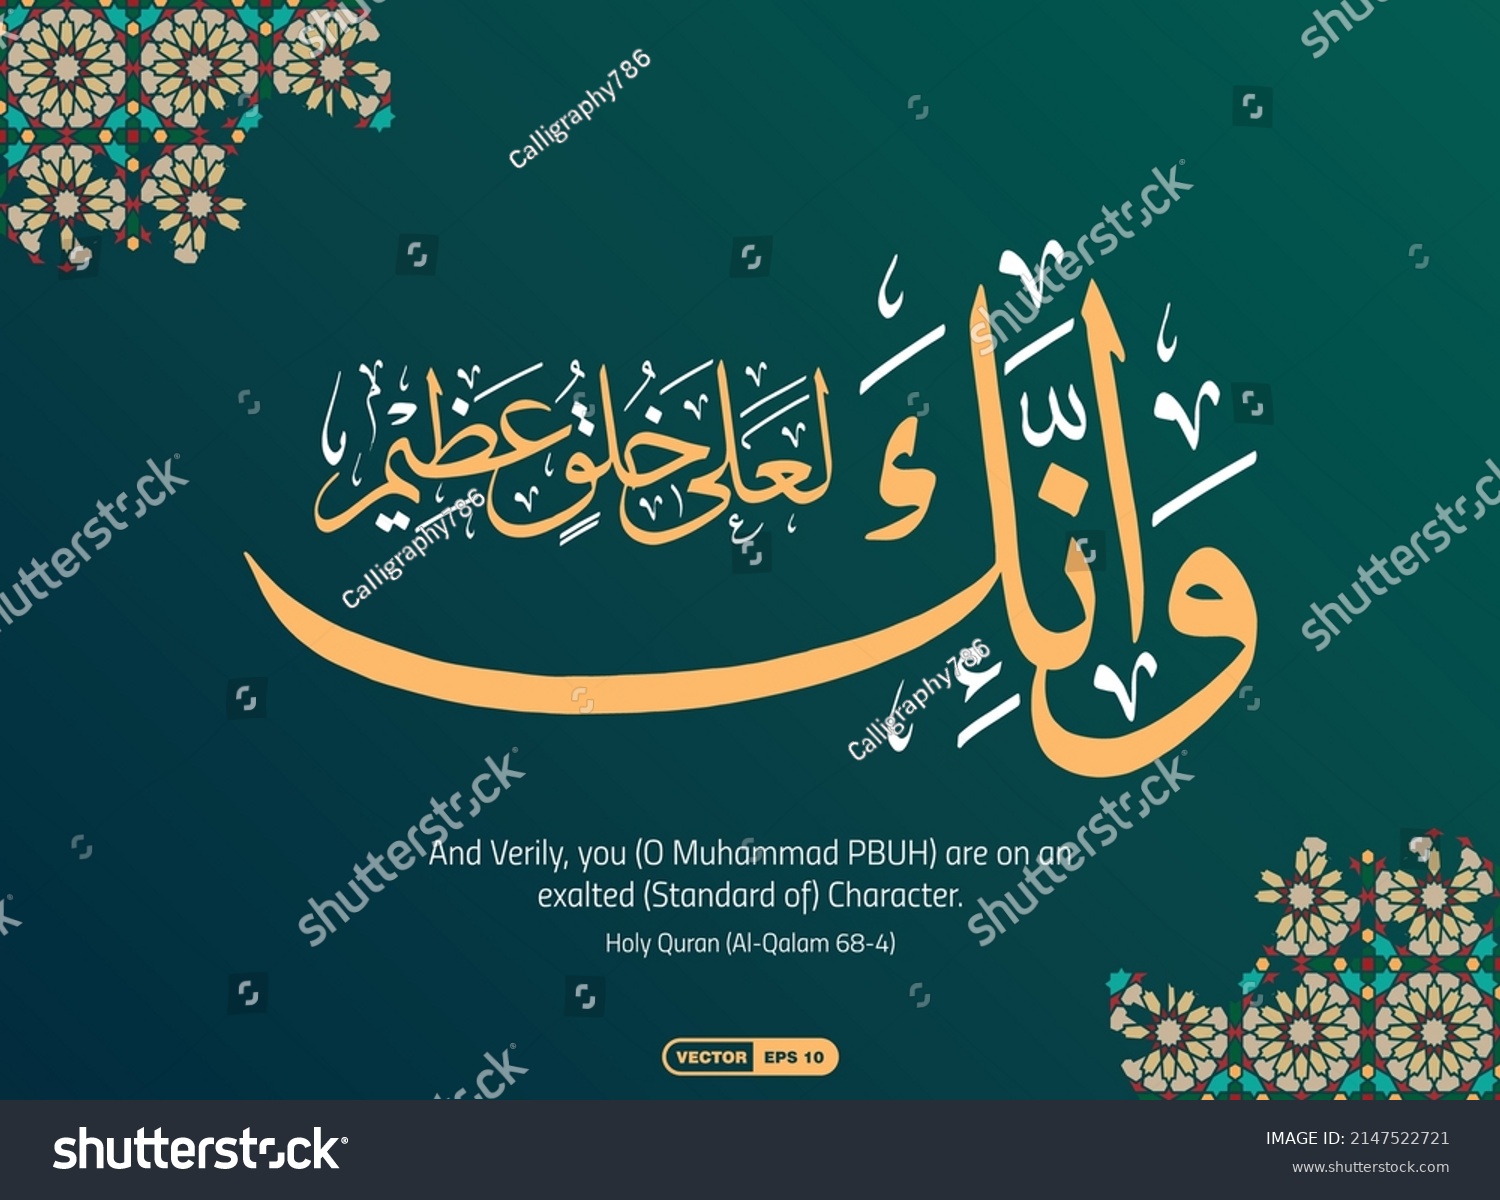 SVG of Calligraphy of Fourth Ayat (Wa innaka la’alaa...) of Surah Al-Qalam (68:4 Quran) with English Translation; And Verily, you (O Muhammad PBUH) are on an exalted (Standard of) Character. Vector eps 10 svg